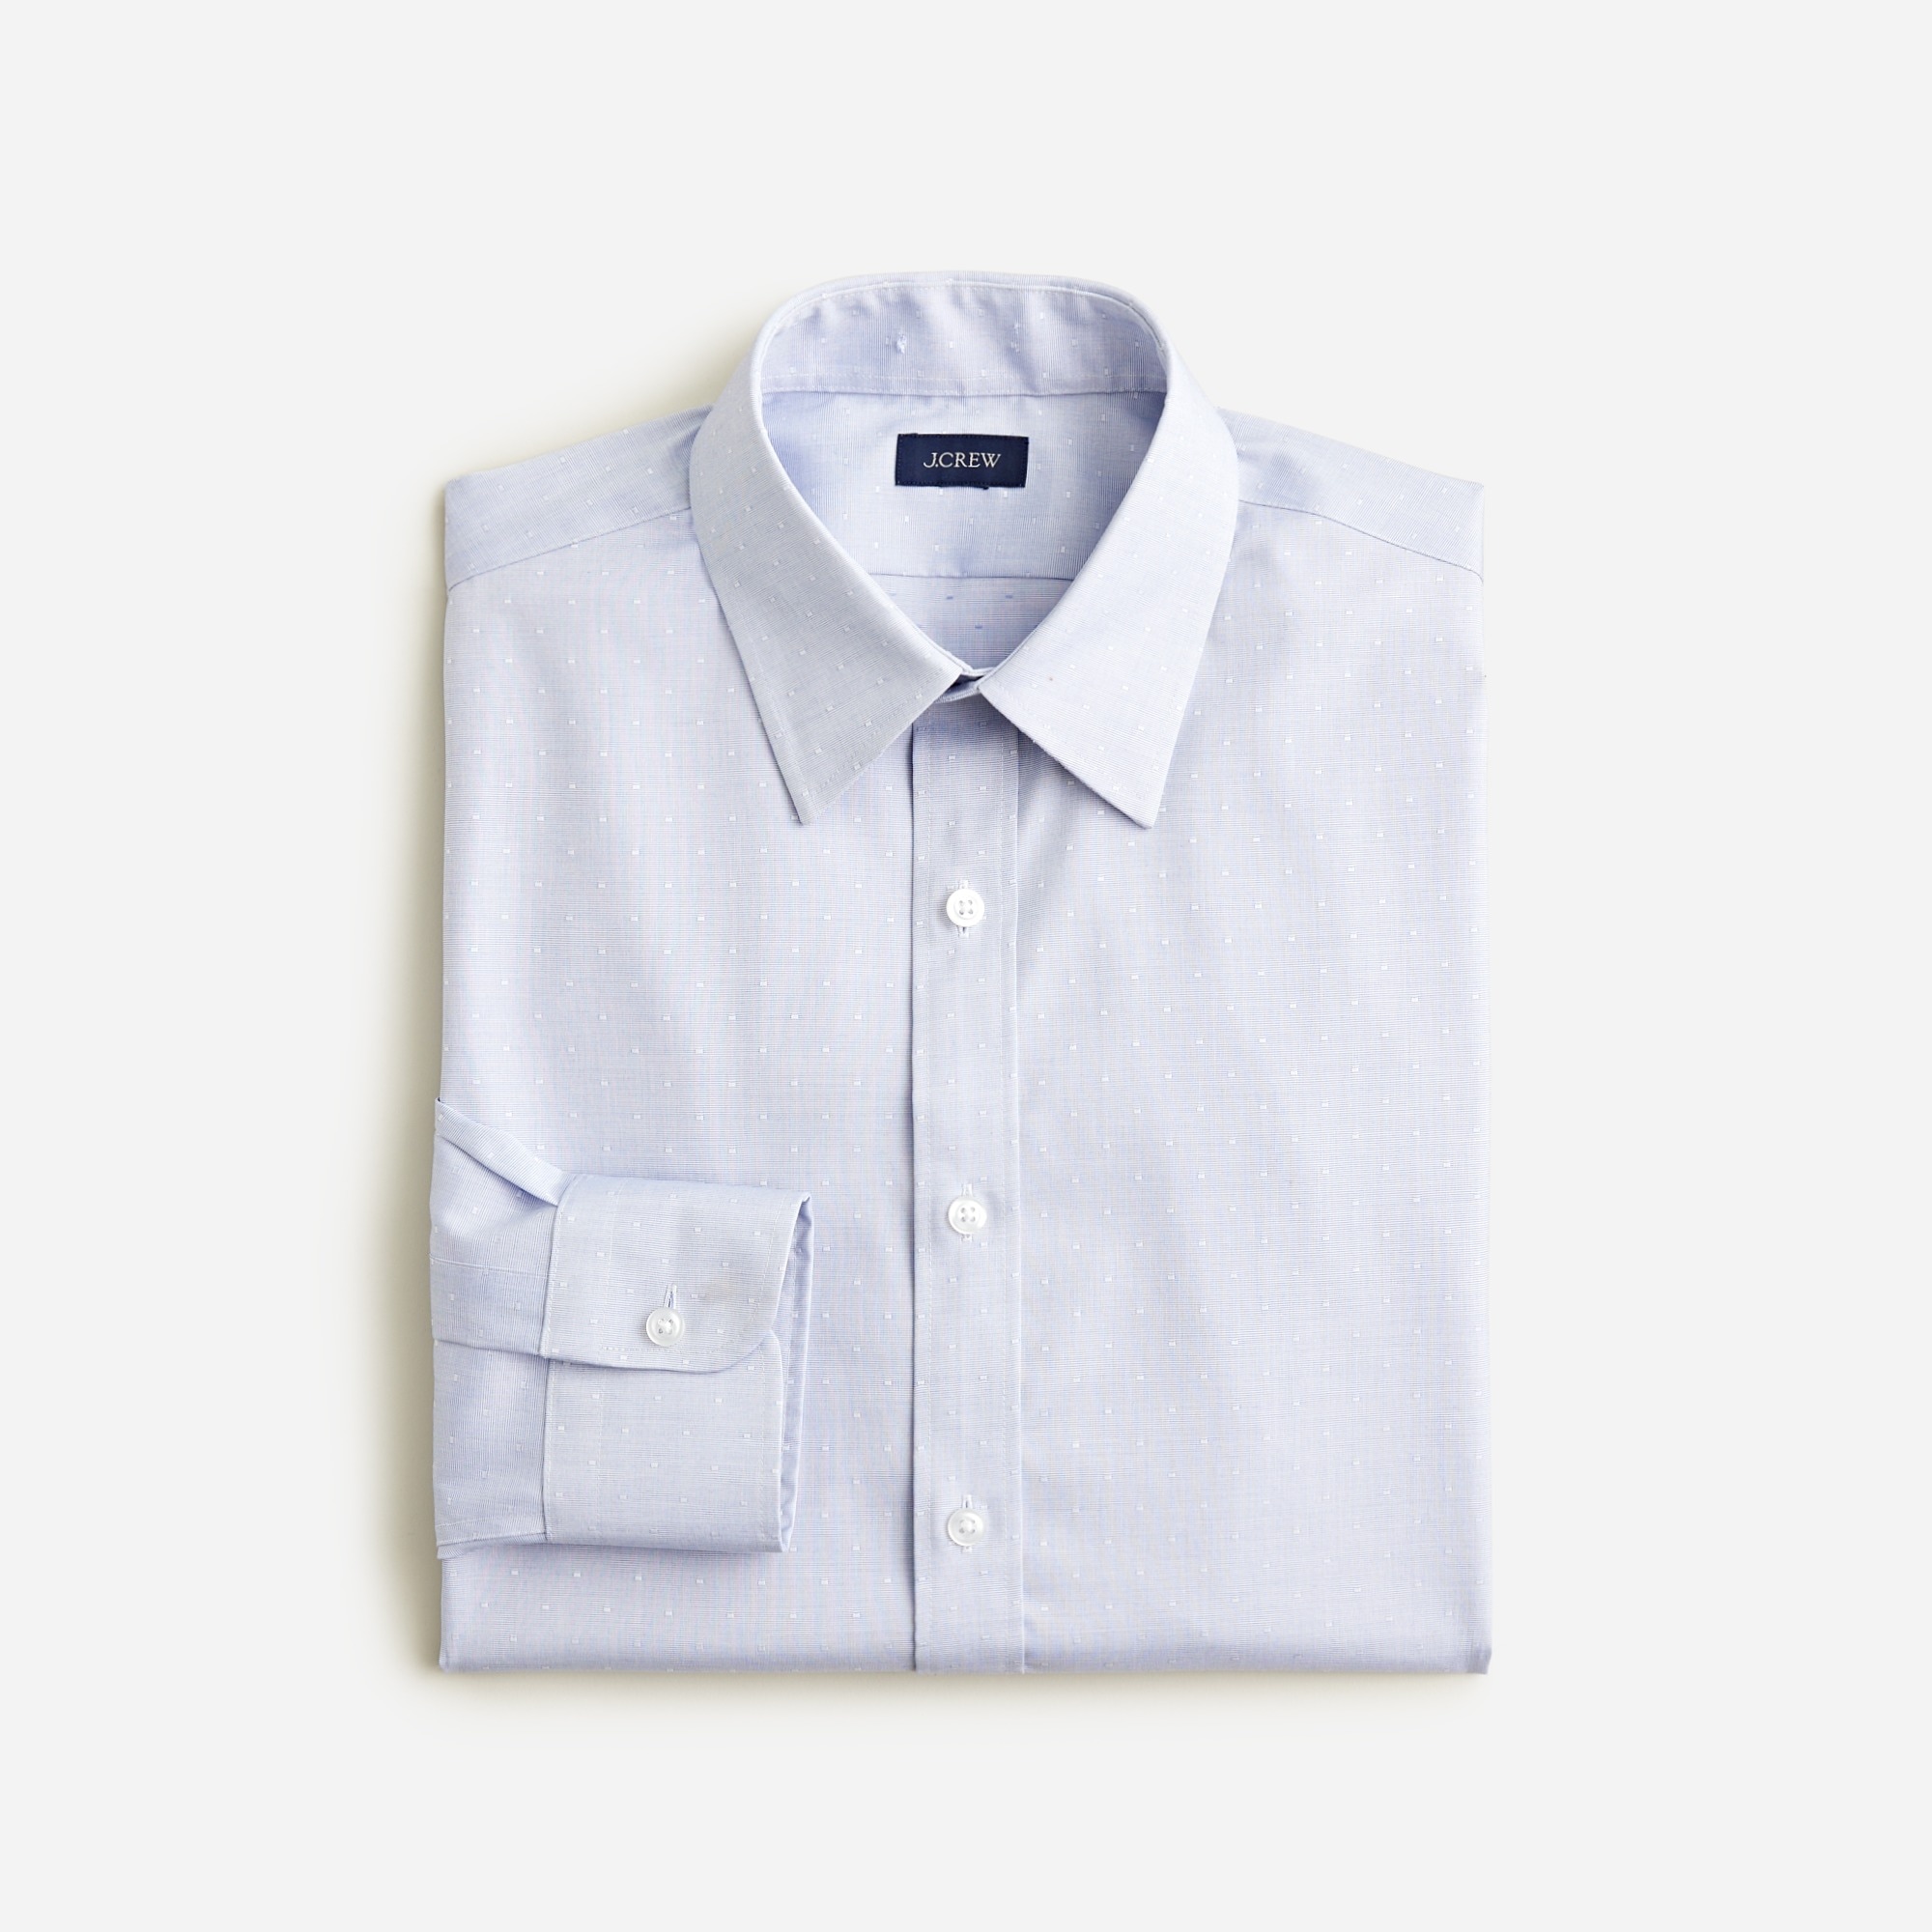 mens Tall Bowery wrinkle-free dobby dress shirt with point collar